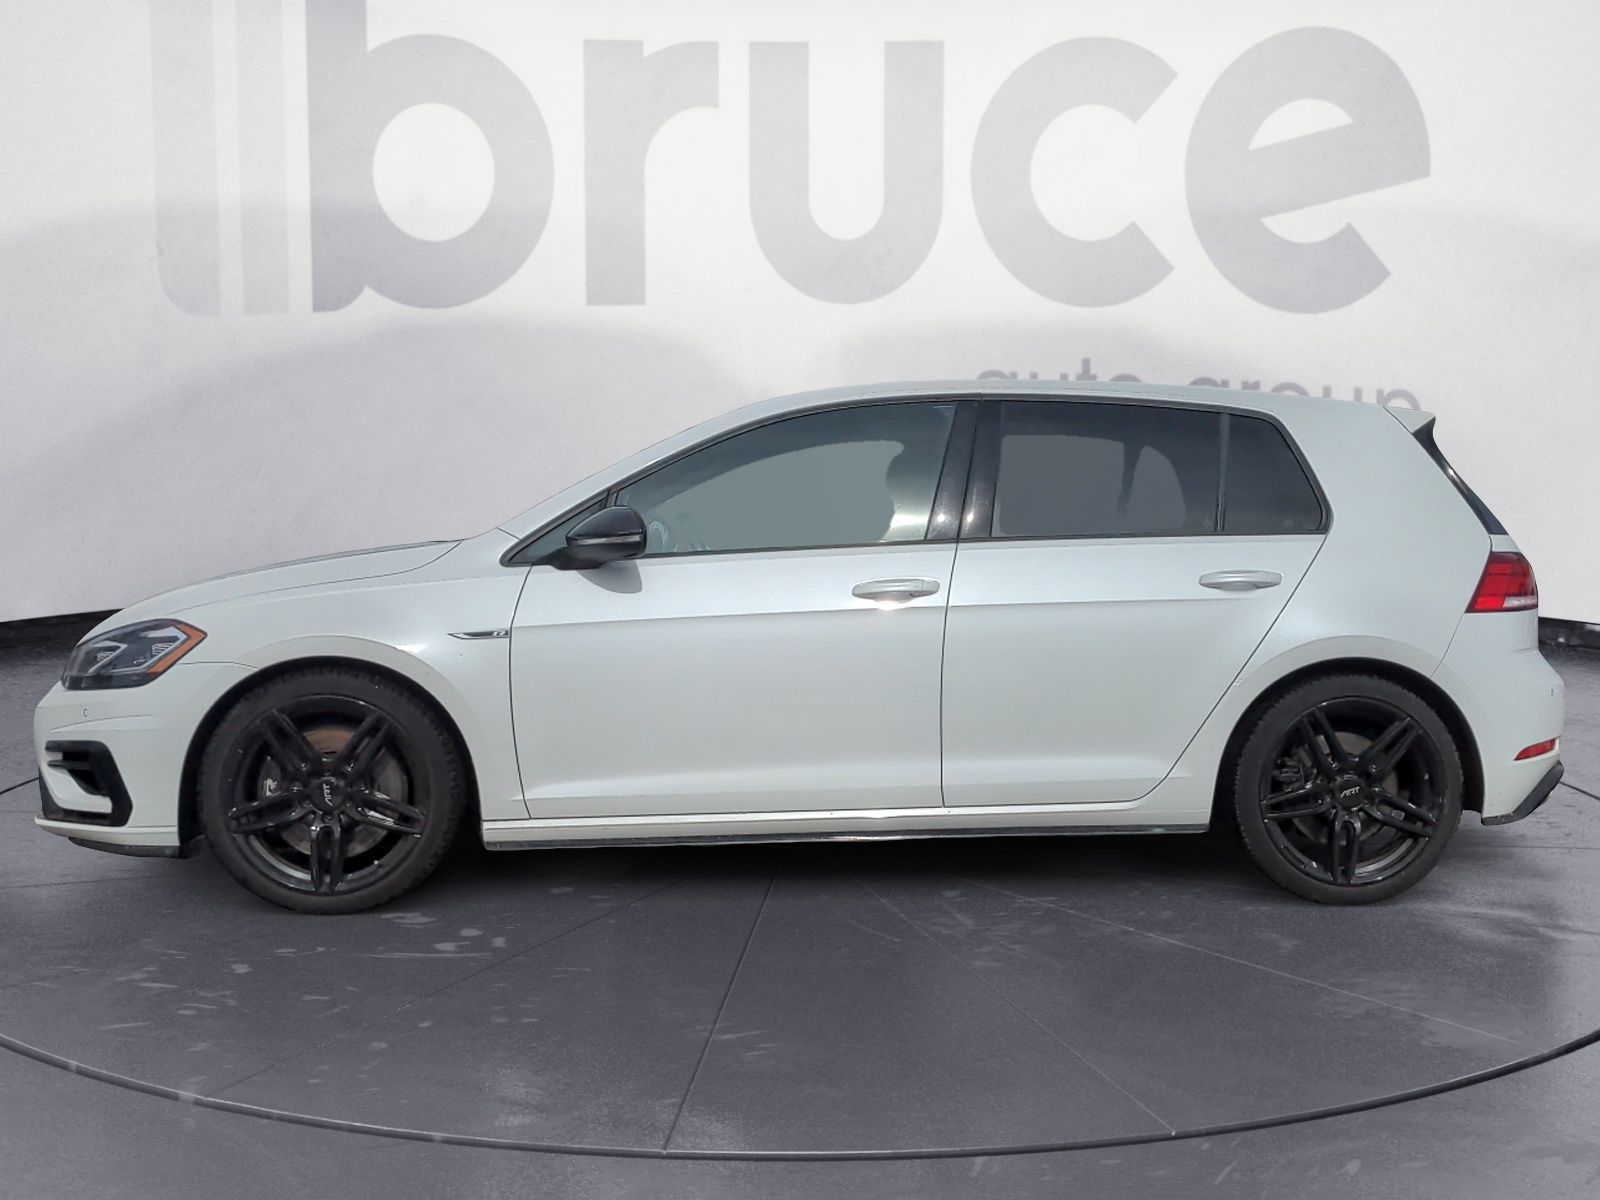 2019 Volkswagen Golf R BASE 2YR 40K CERTIFIED ASSURANCE AVAILABLE!